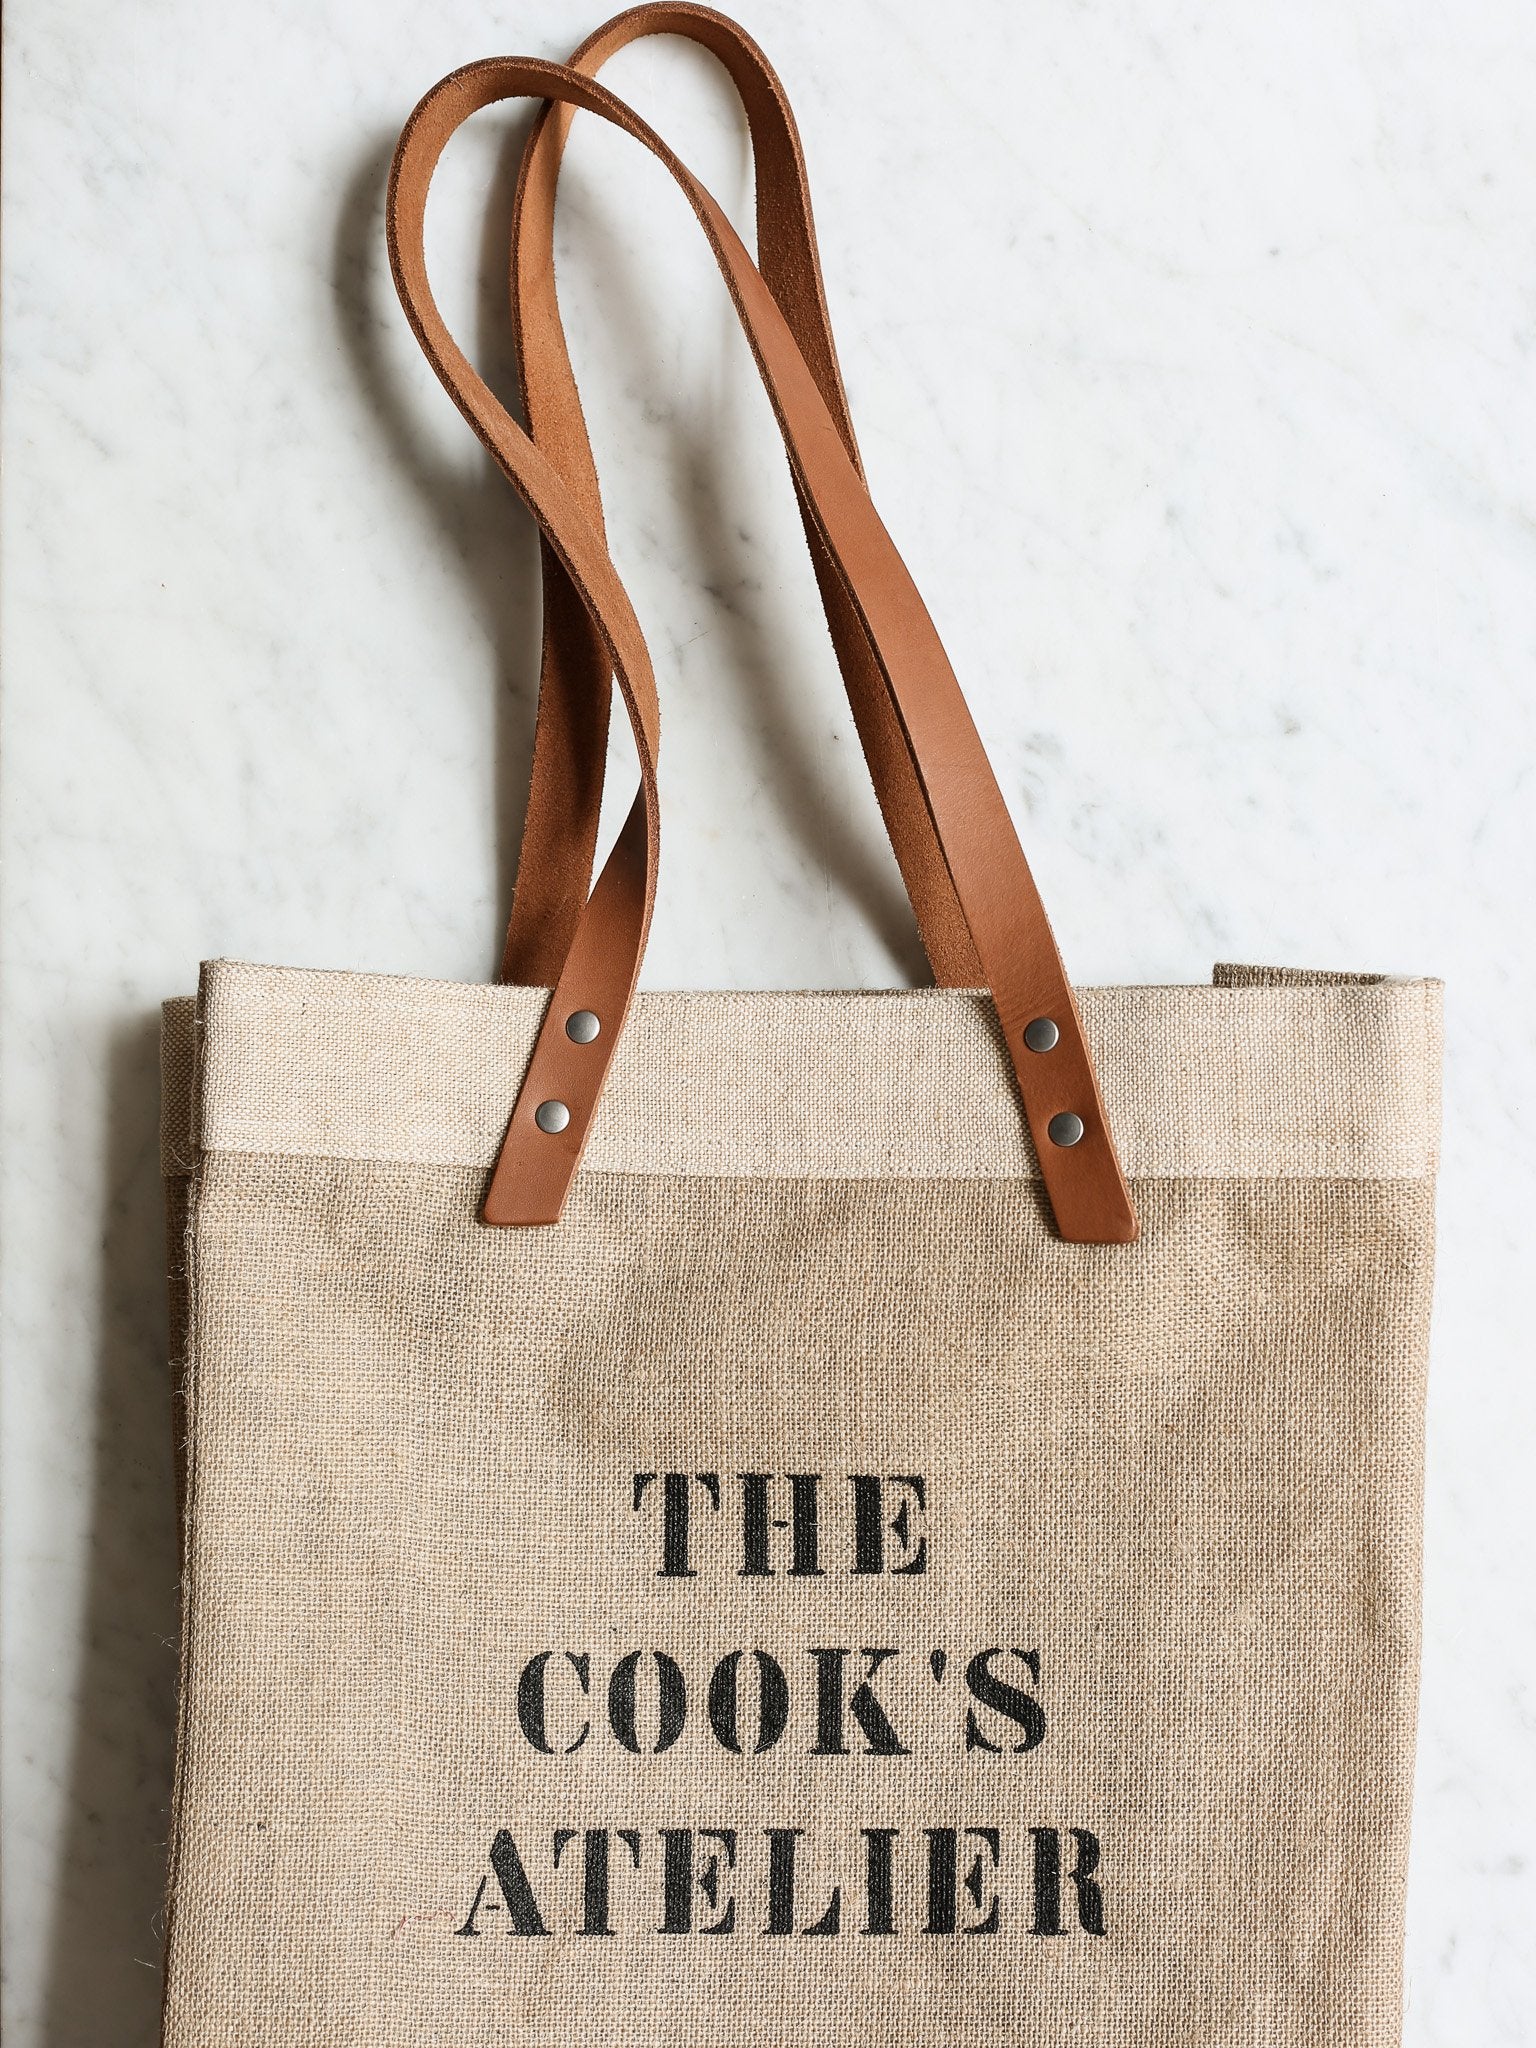 The Cook's Atelier Market Tote